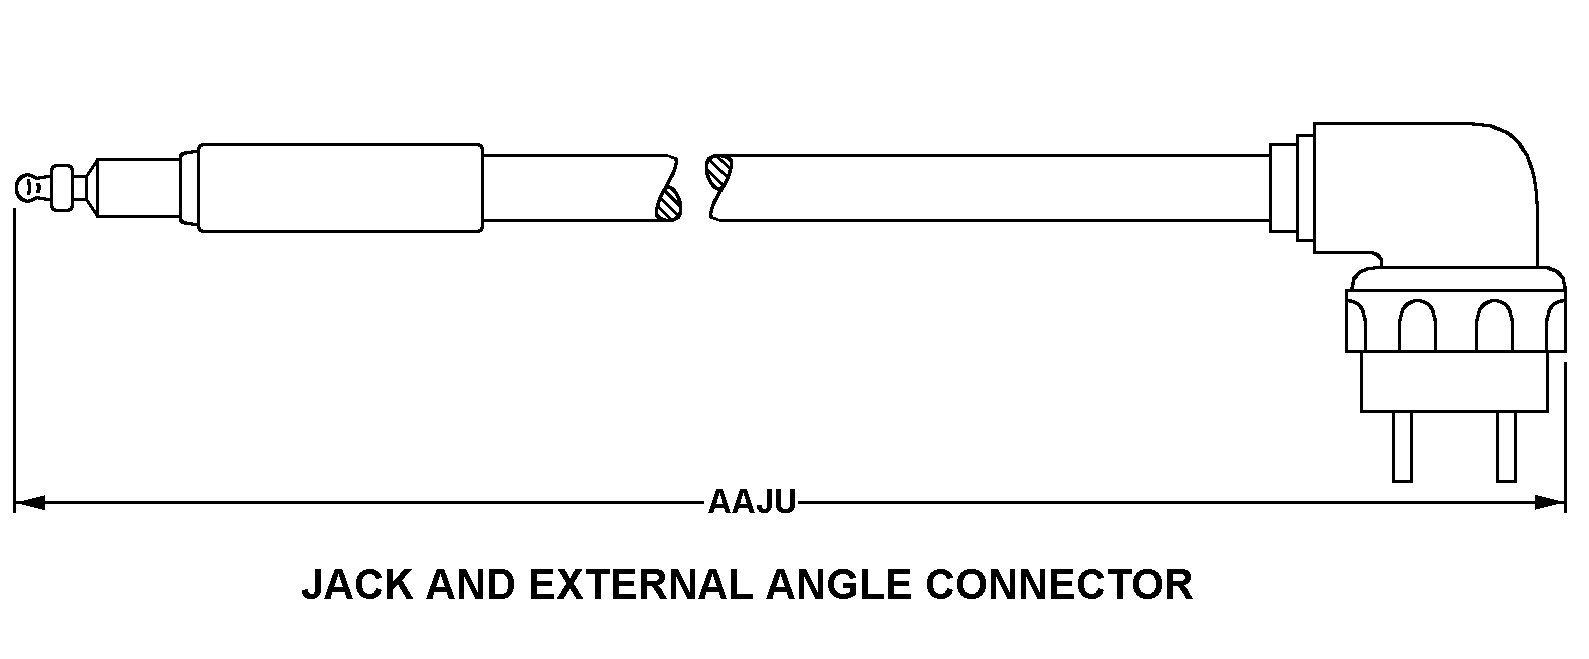 JACK AND EXTERNAL ANGLE CONNECTOR style nsn 5995-01-301-5833